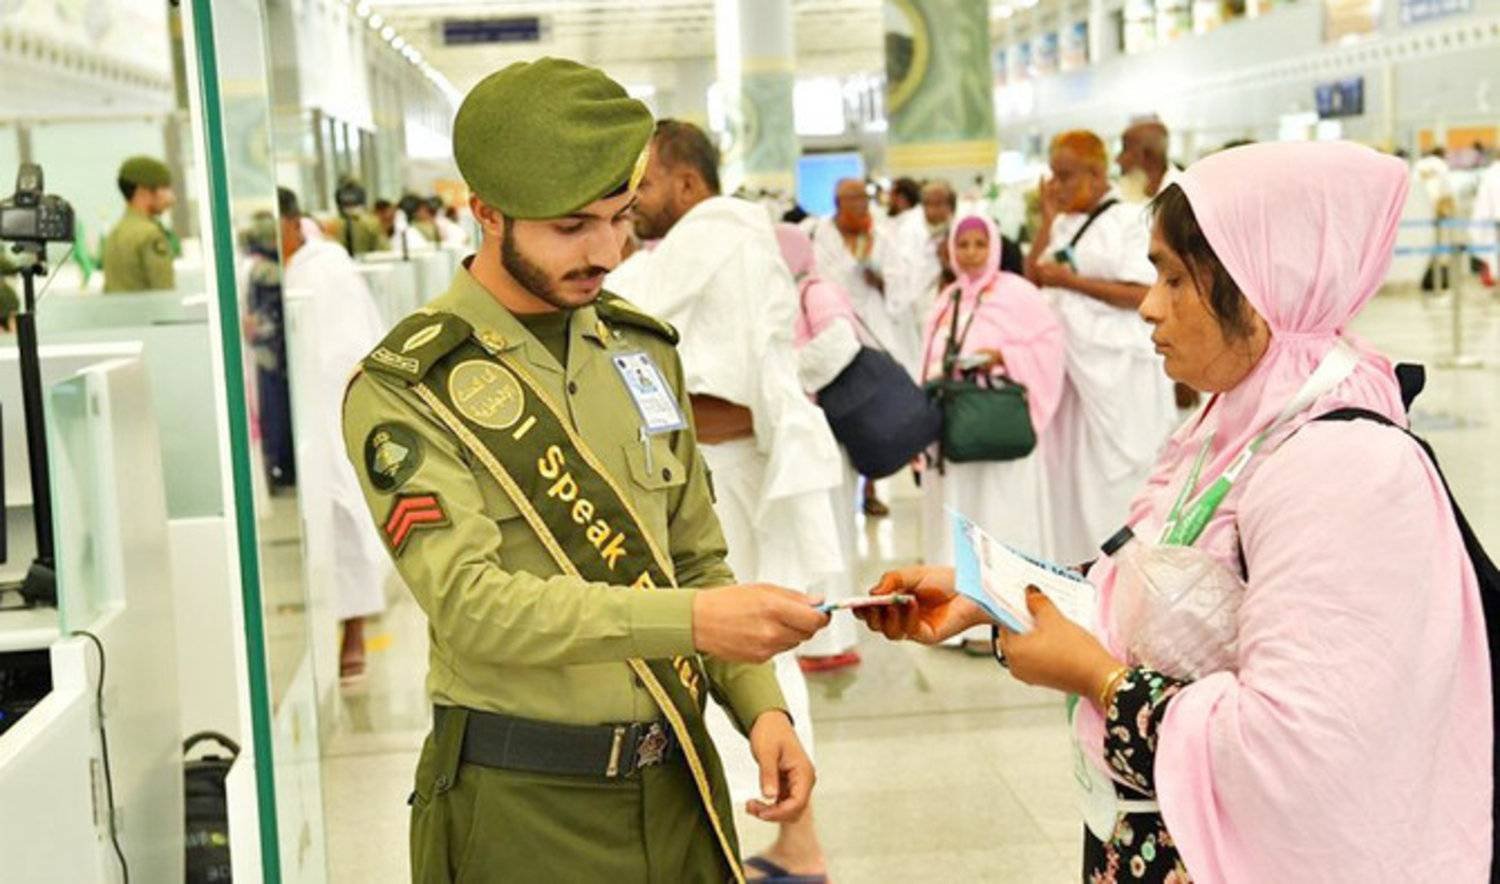 The General Directorate of Passports assigns students who speak English, Spanish, Indonesian, Japanese, Persian, Urdu, Turkish and other languages to the airports in Jeddah and Madinah in order to facilitate communication and dealing with Hajj pilgrims. (SPA)
